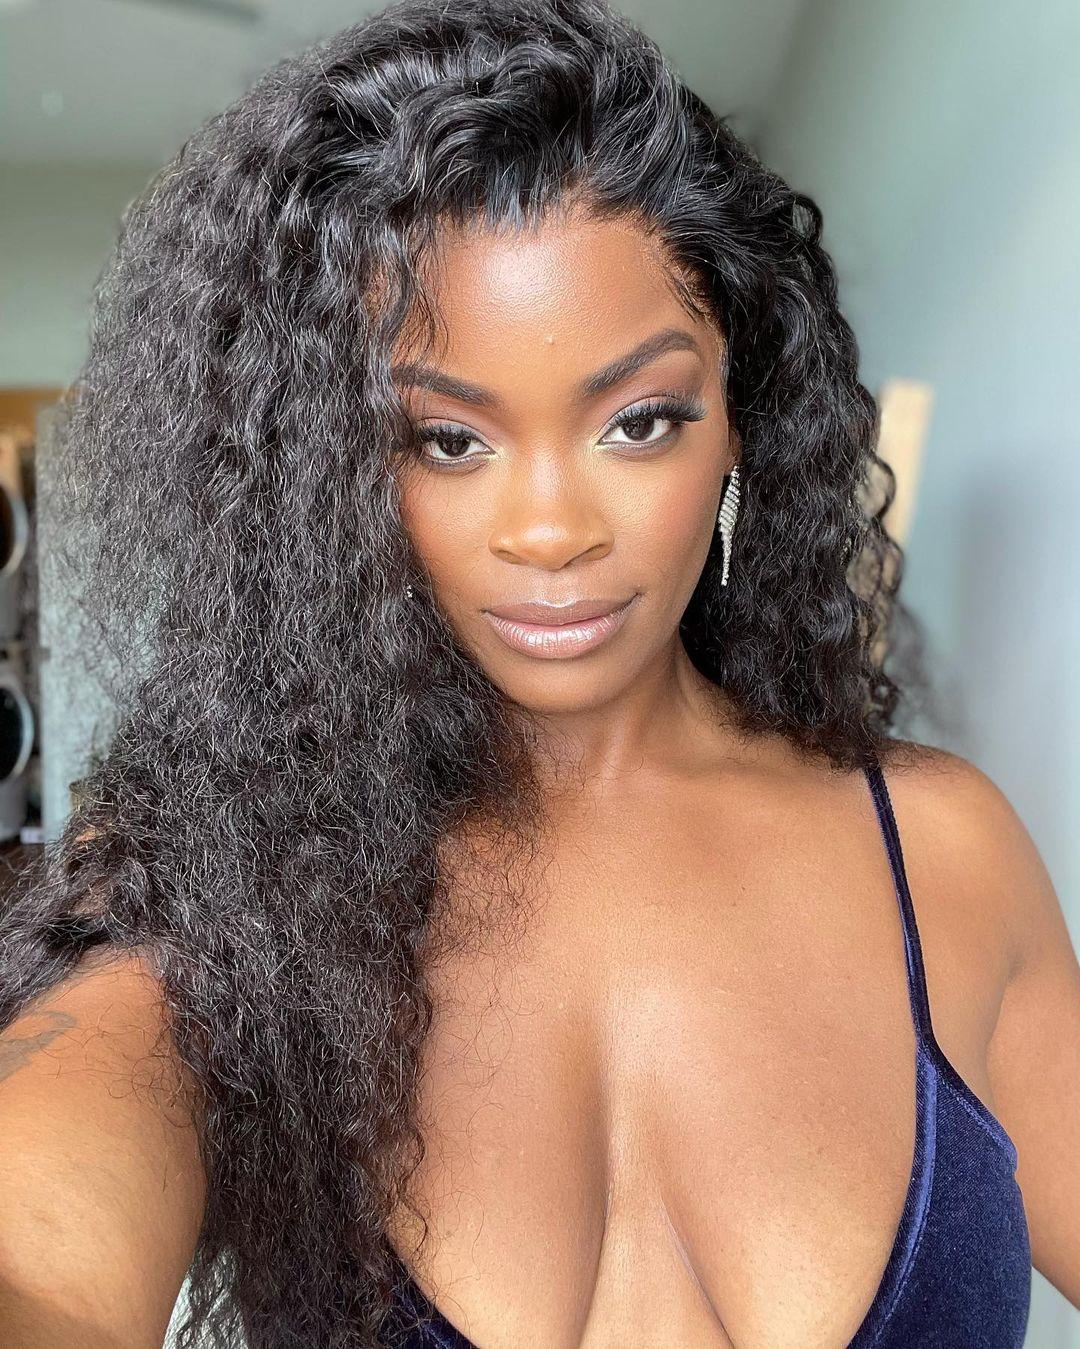 Ari Lennox Performs Disney Hit, Begs For In-Person Audition For 'Princess & The Frog'